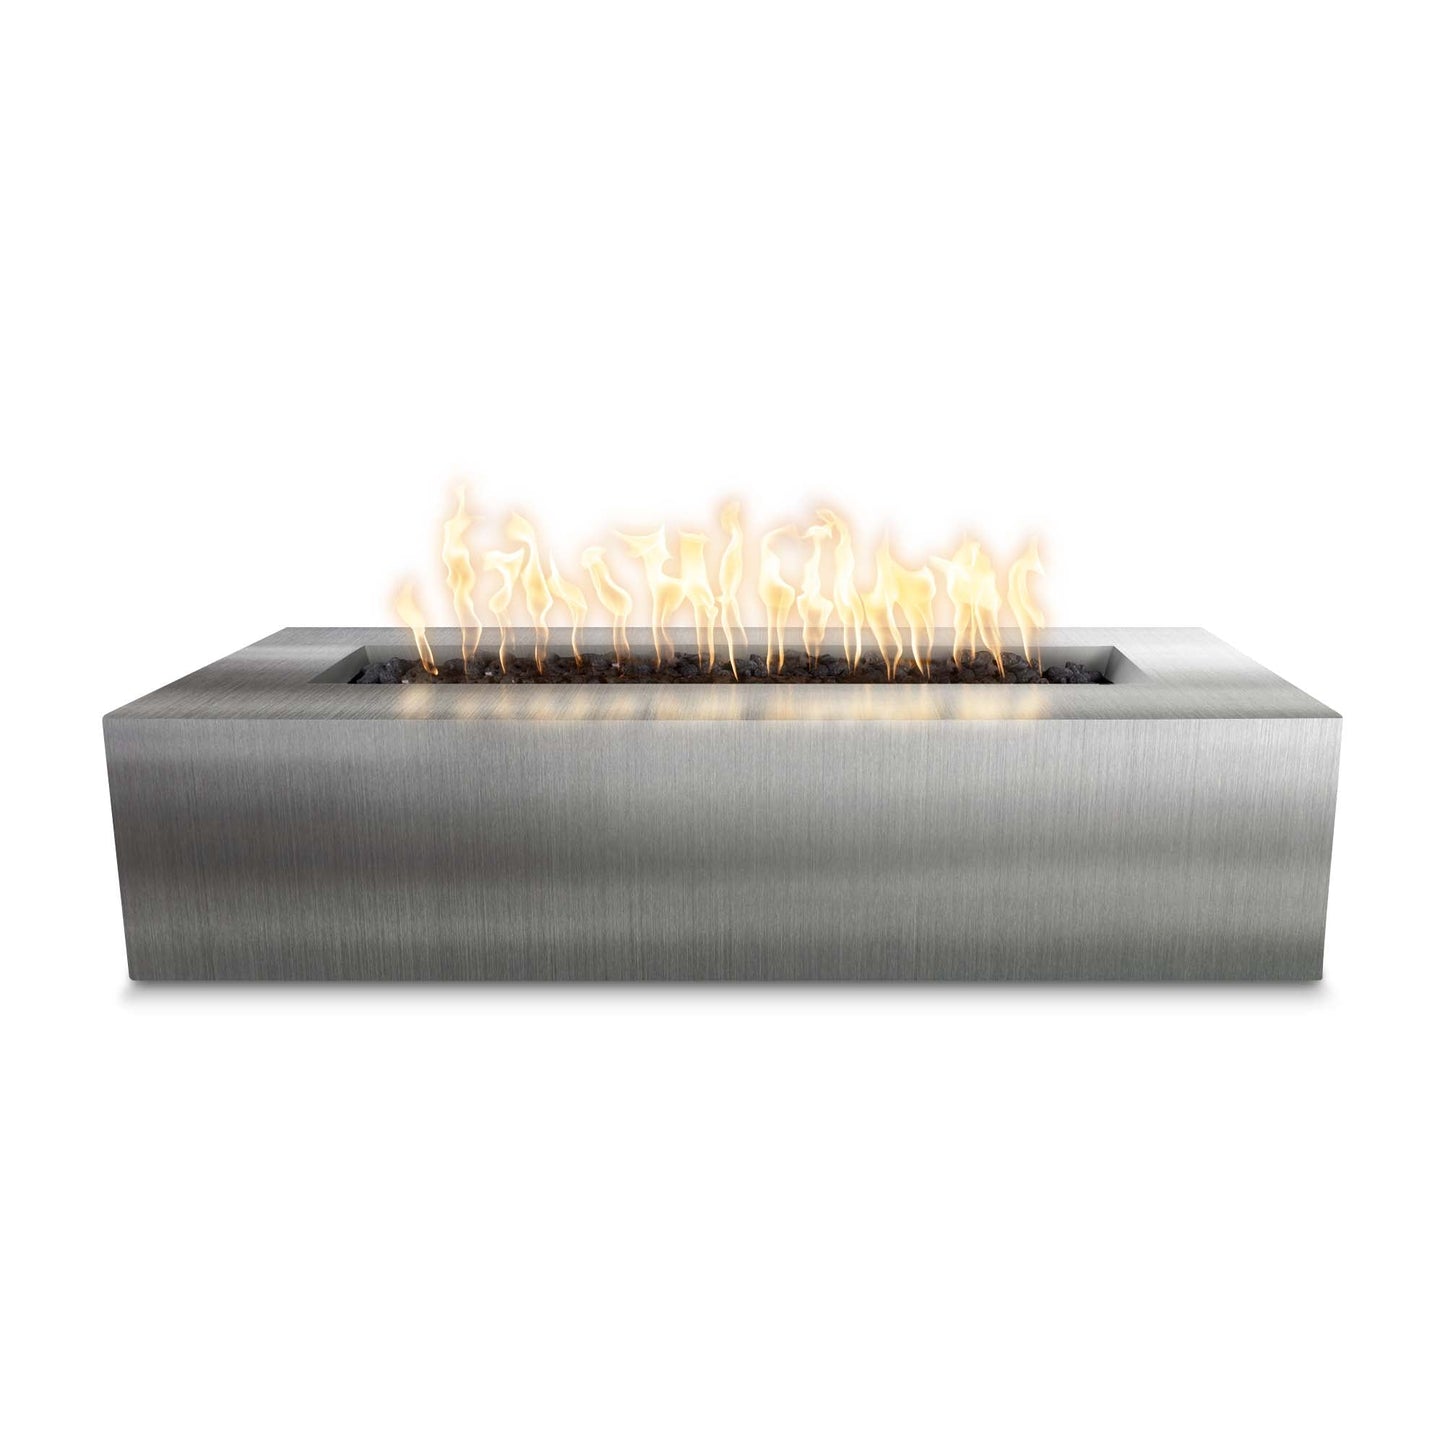 The Outdoor Plus Rectangular Regal 54" Corten Steel Liquid Propane Fire Pit with Match Lit with Flame Sense Ignition